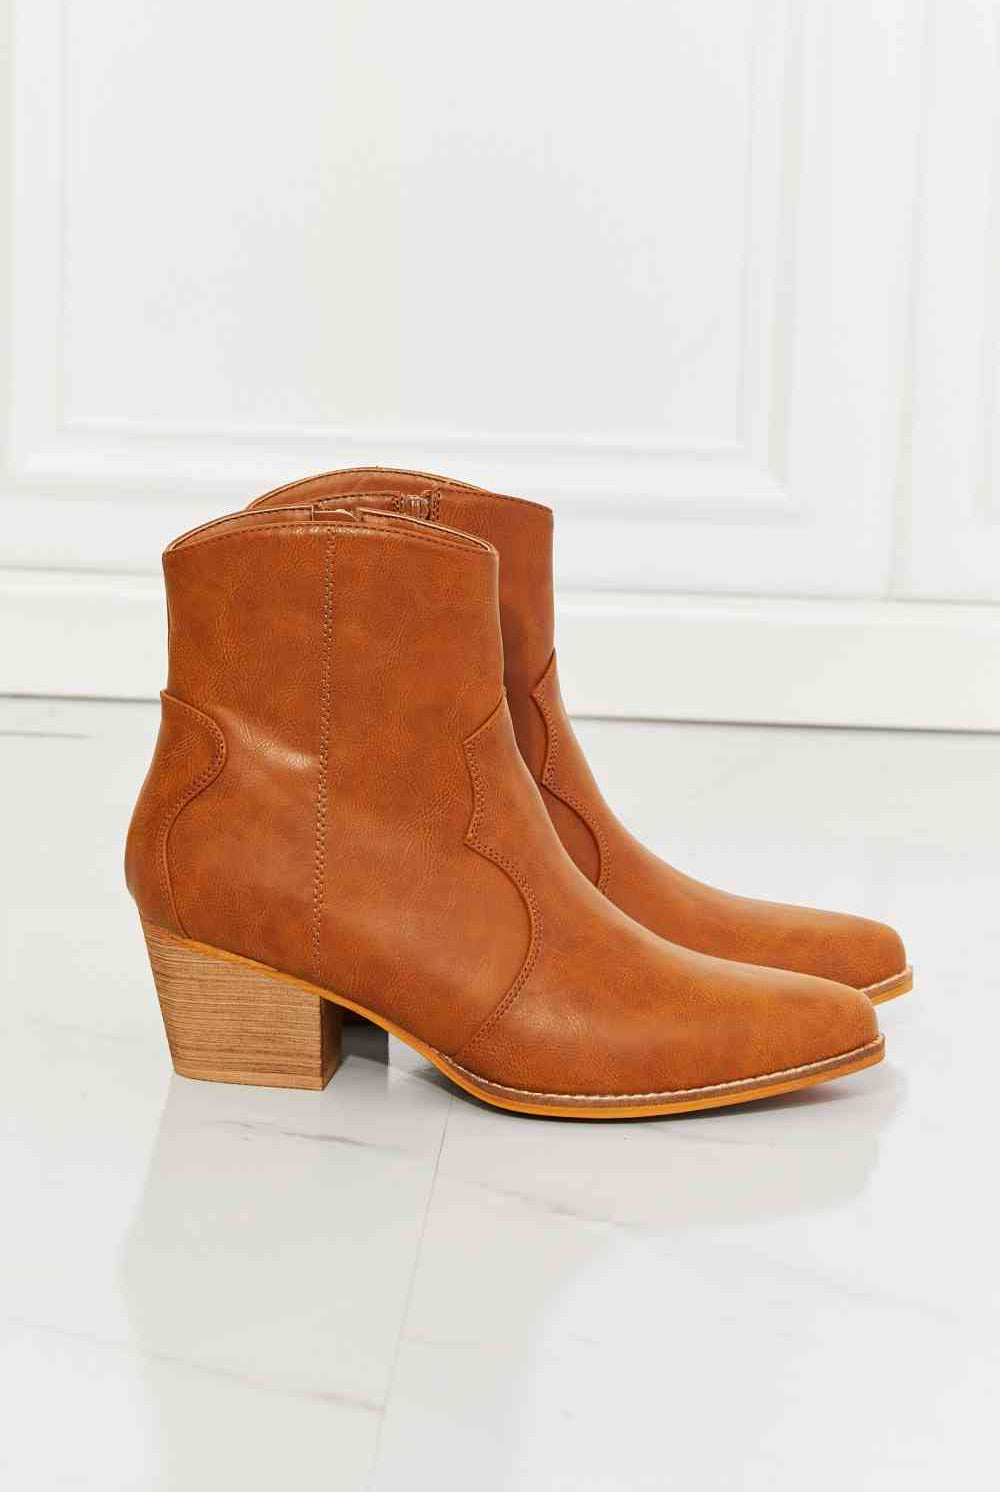 Beige MMShoes Watertower Town Faux Leather Western Ankle Boots in Ochre Shoes